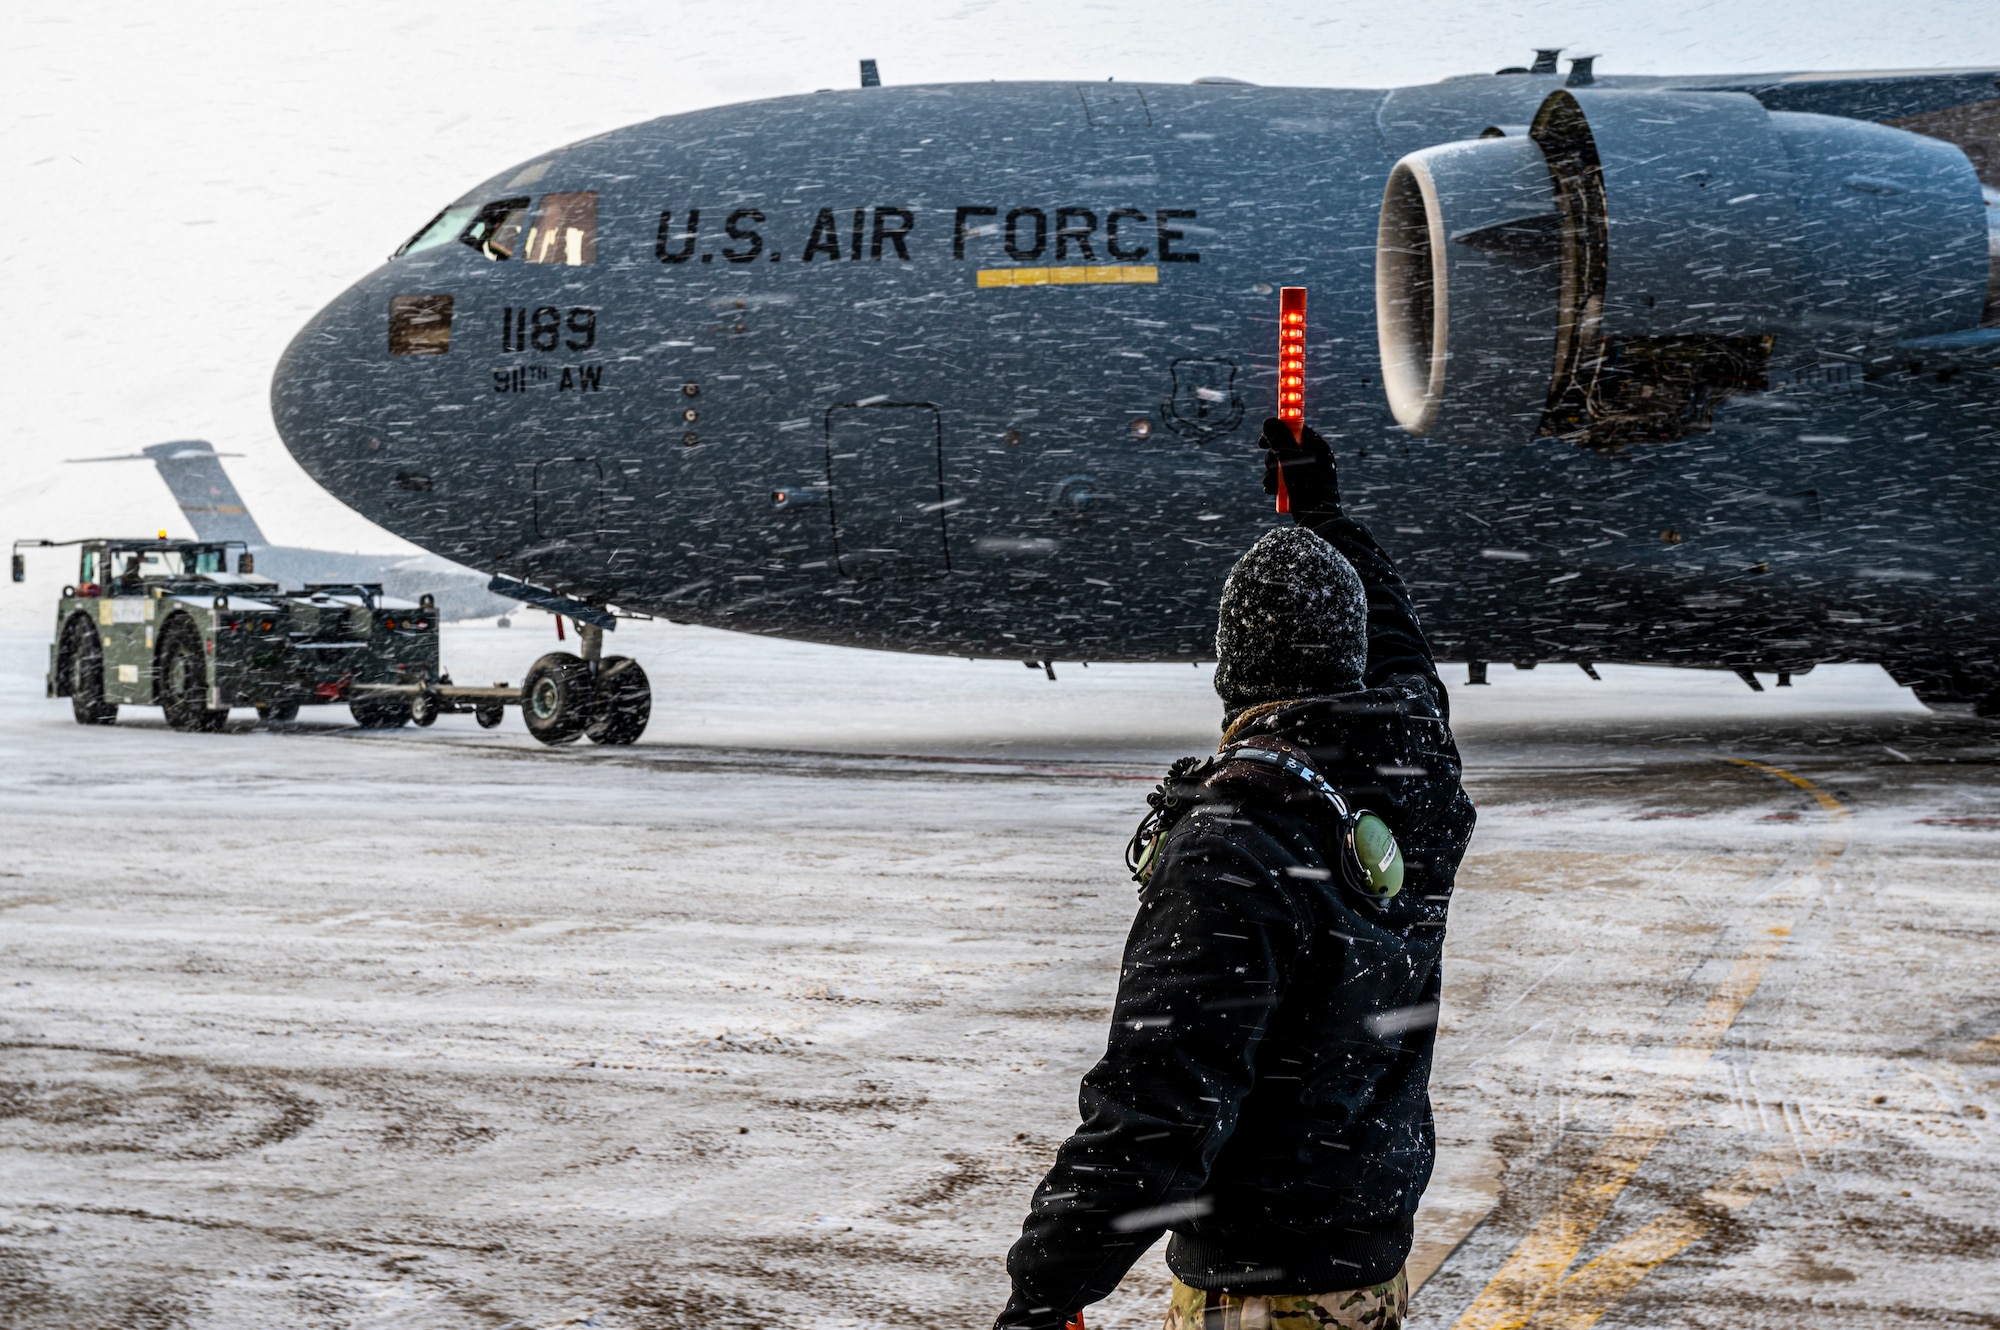 Tech. Sgt. Jeffrey Raymond, 911th Maintenance Squadron crew chief, relays information to the tow team supervisor while towing a C-17 Globemaster III aircraft from the two-bay hangar onto the flight line at the Pittsburgh International Airport Air Reserve Station, Pennsylvania, Jan. 20, 2022.